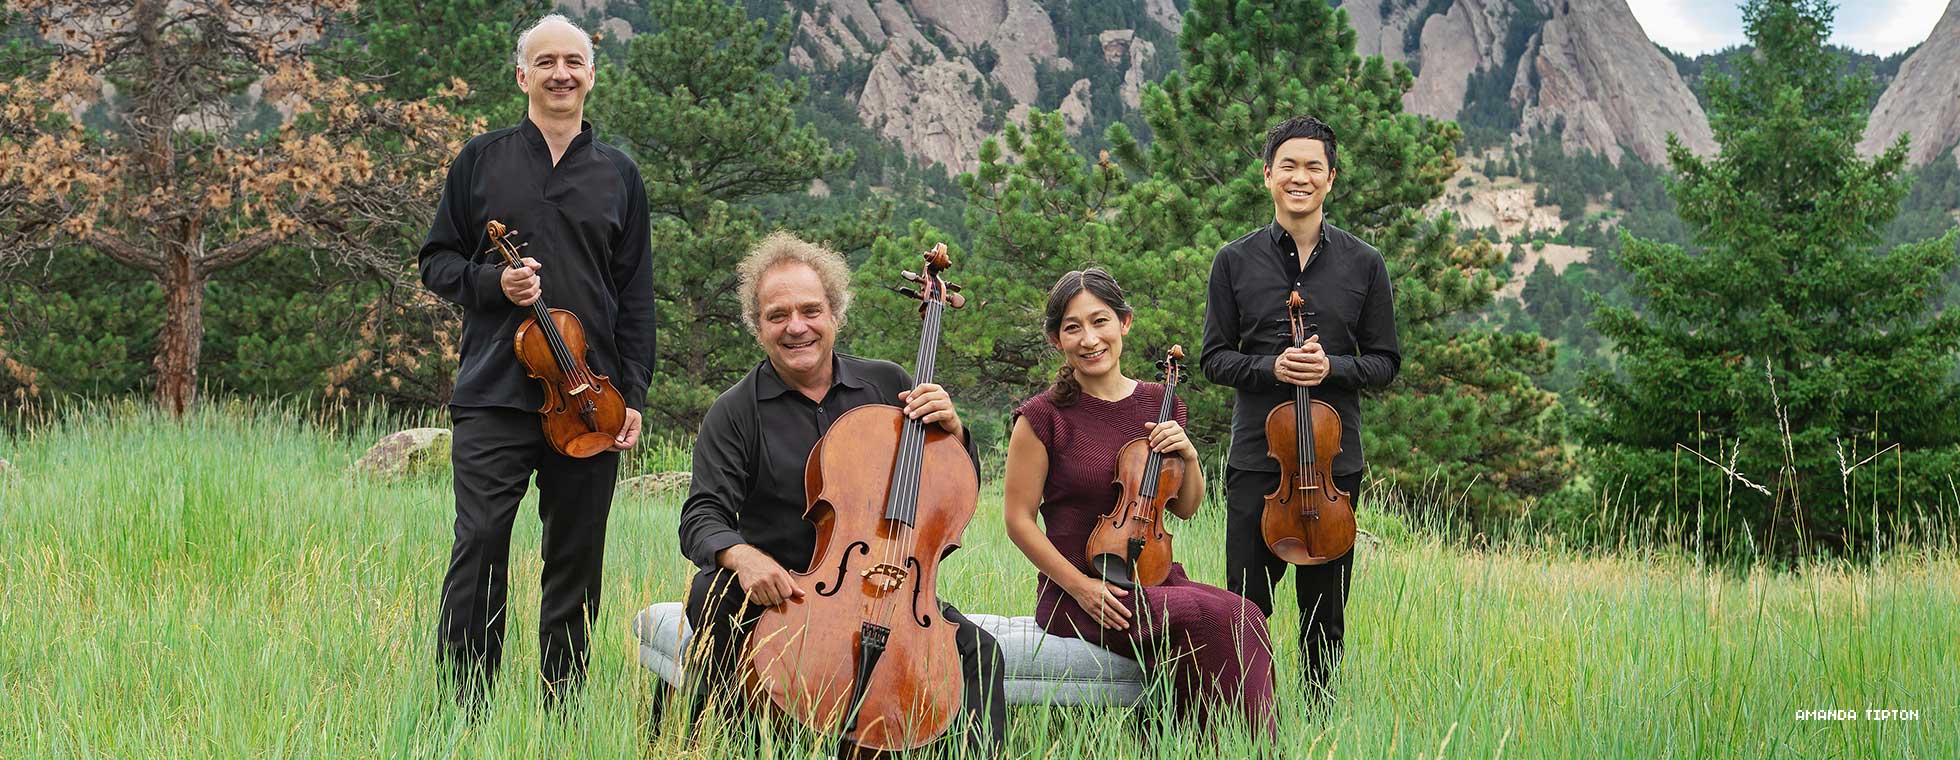 Four musicians posed in an idyllic mountain pasture hold their stringed instruments.